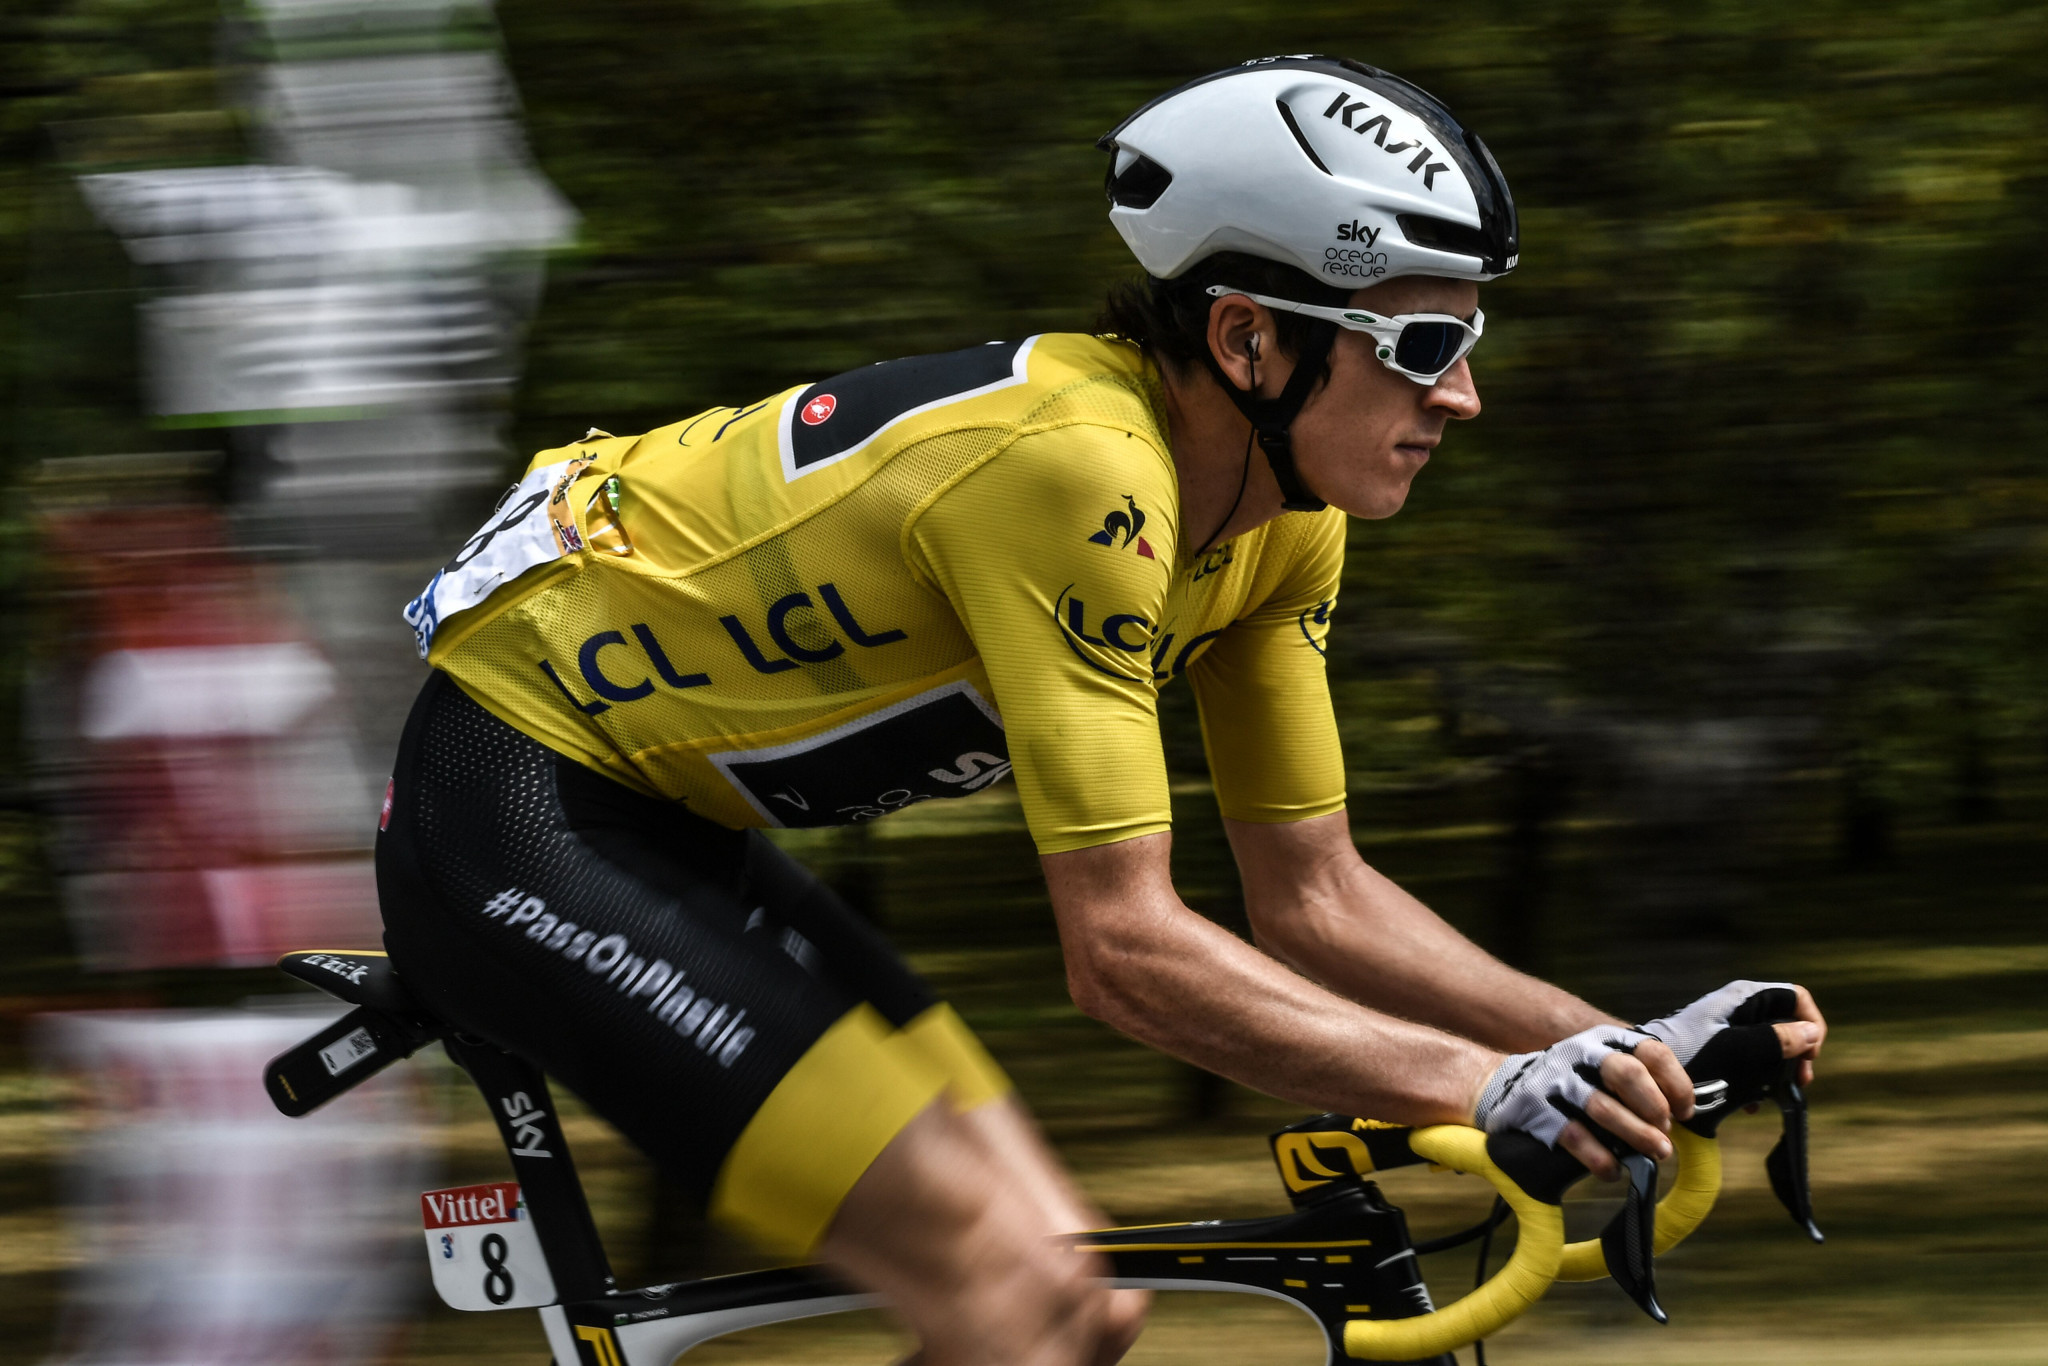 Geraint Thomas remains in the yellow jersey  ©Getty Images